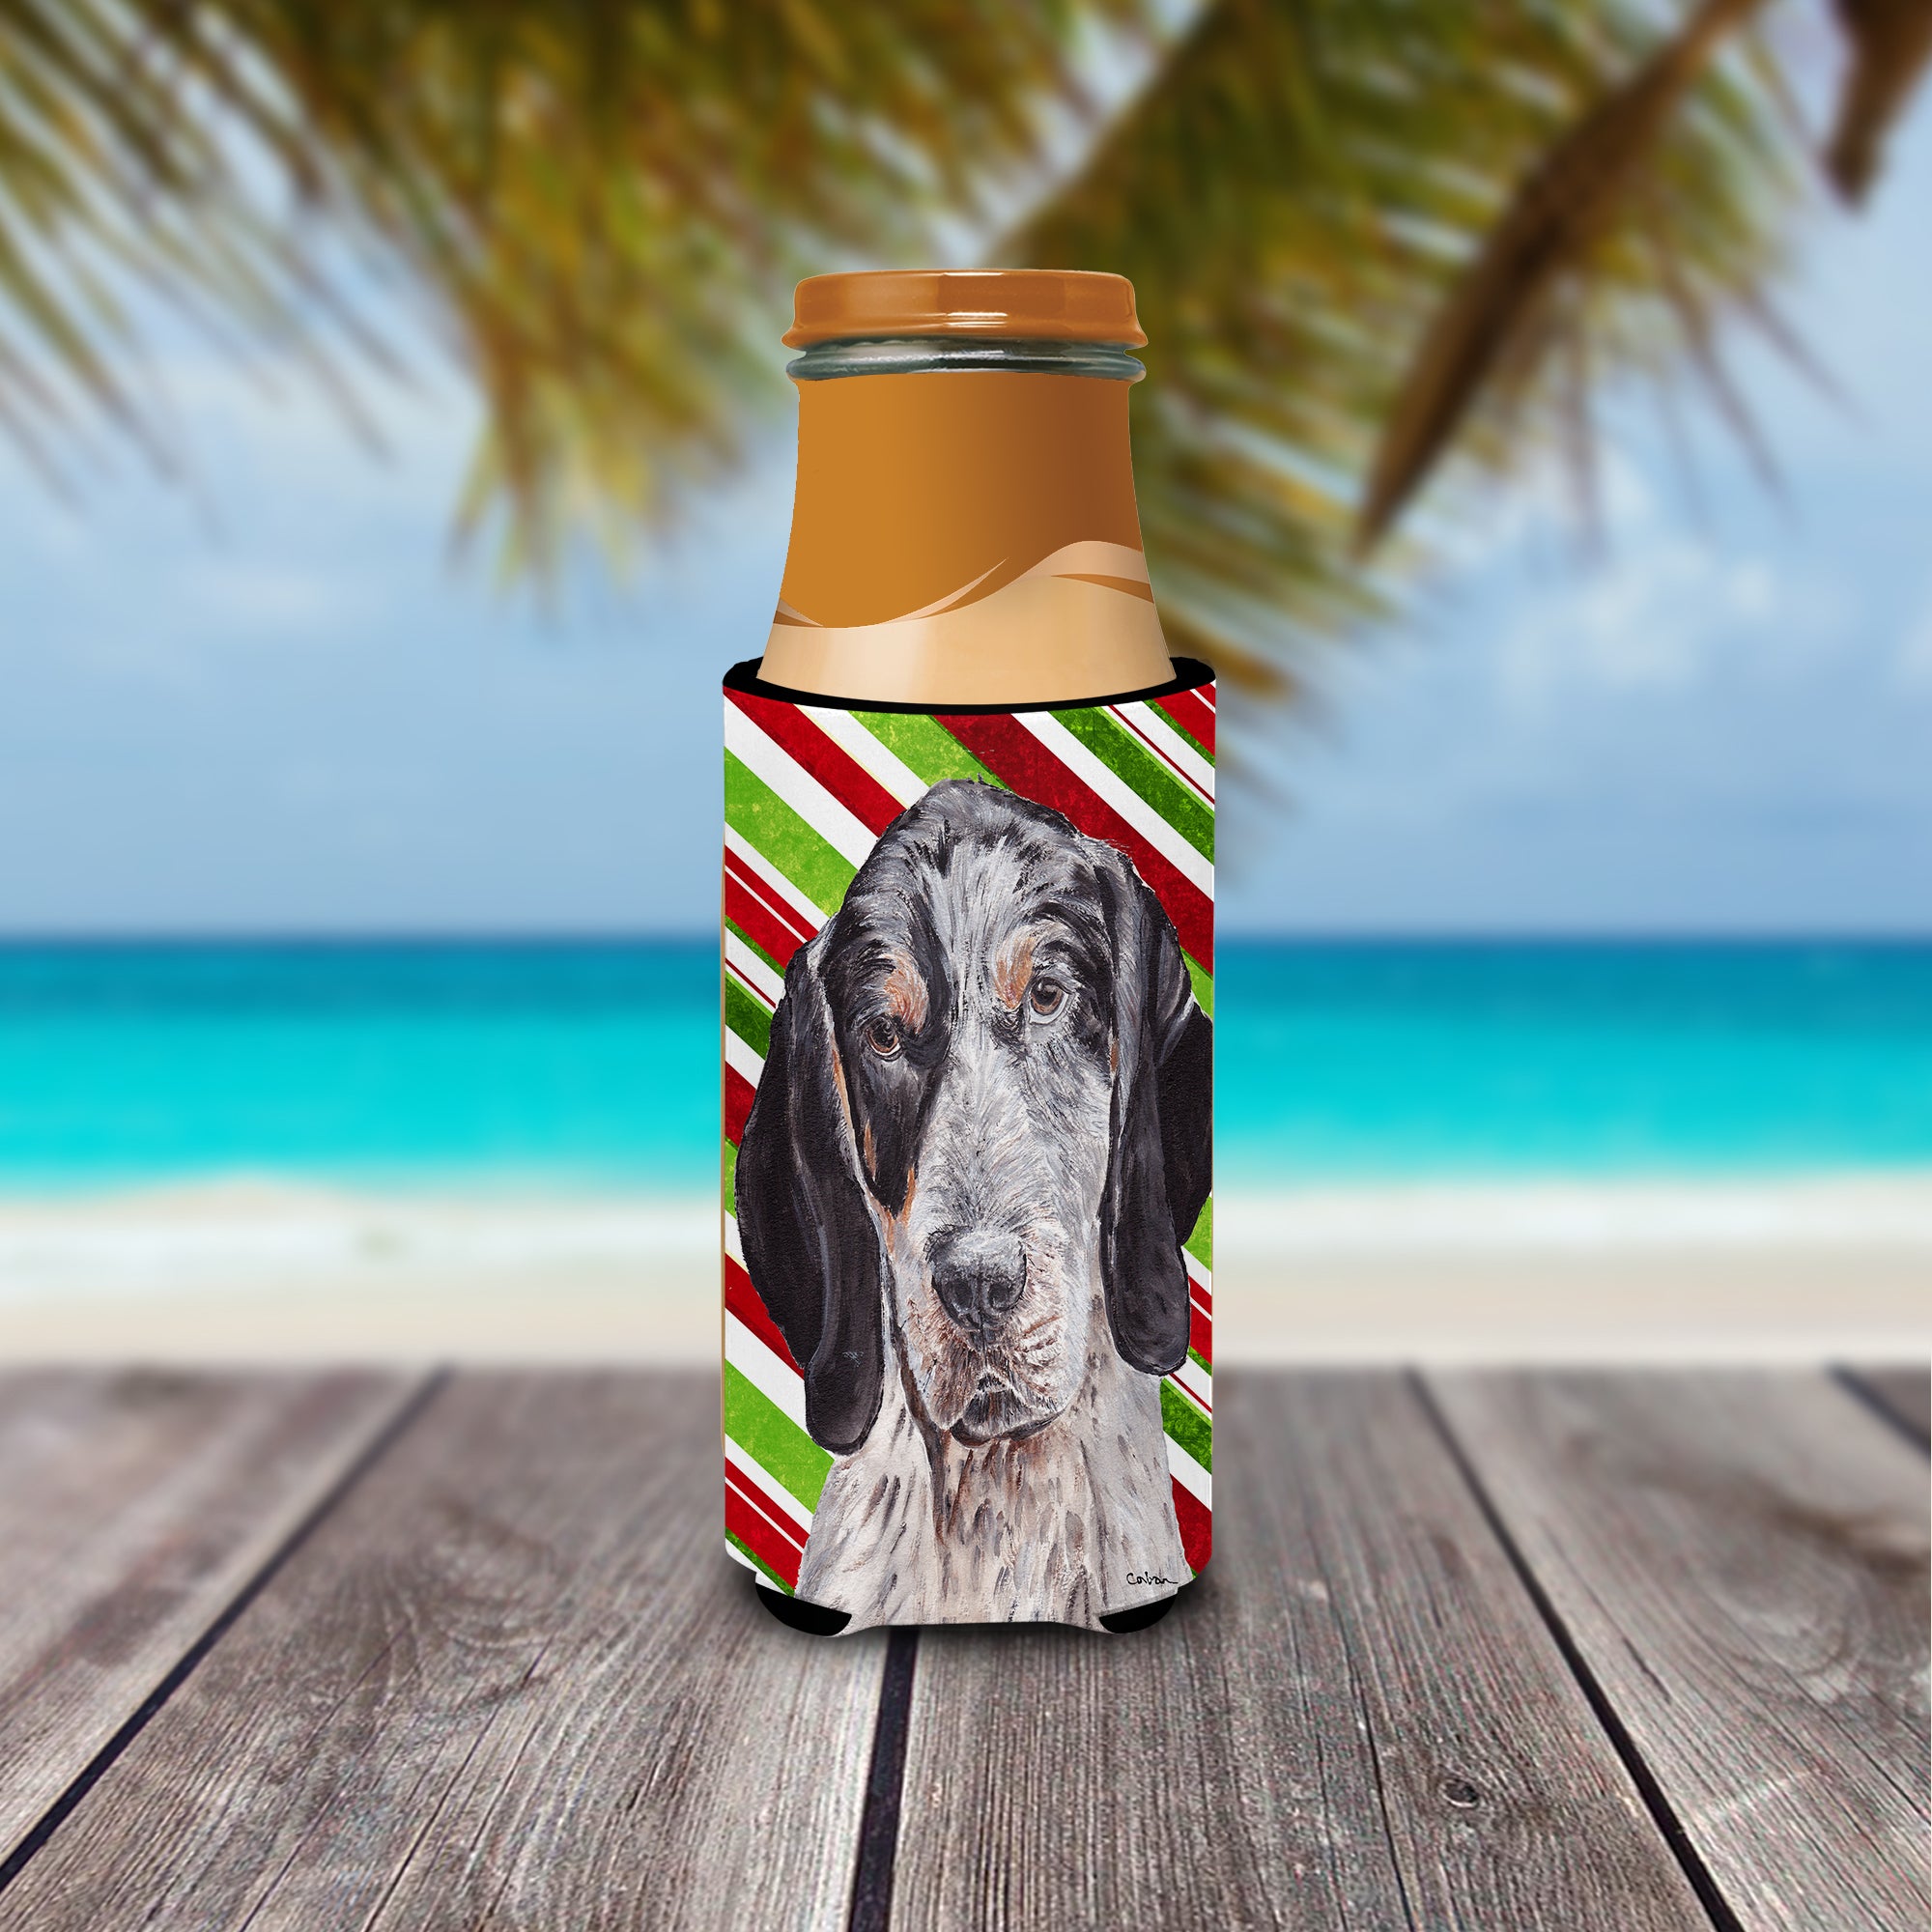 Blue Tick Coonhound Candy Cane Christmas Ultra Beverage Insulators for slim cans SC9793MUK.